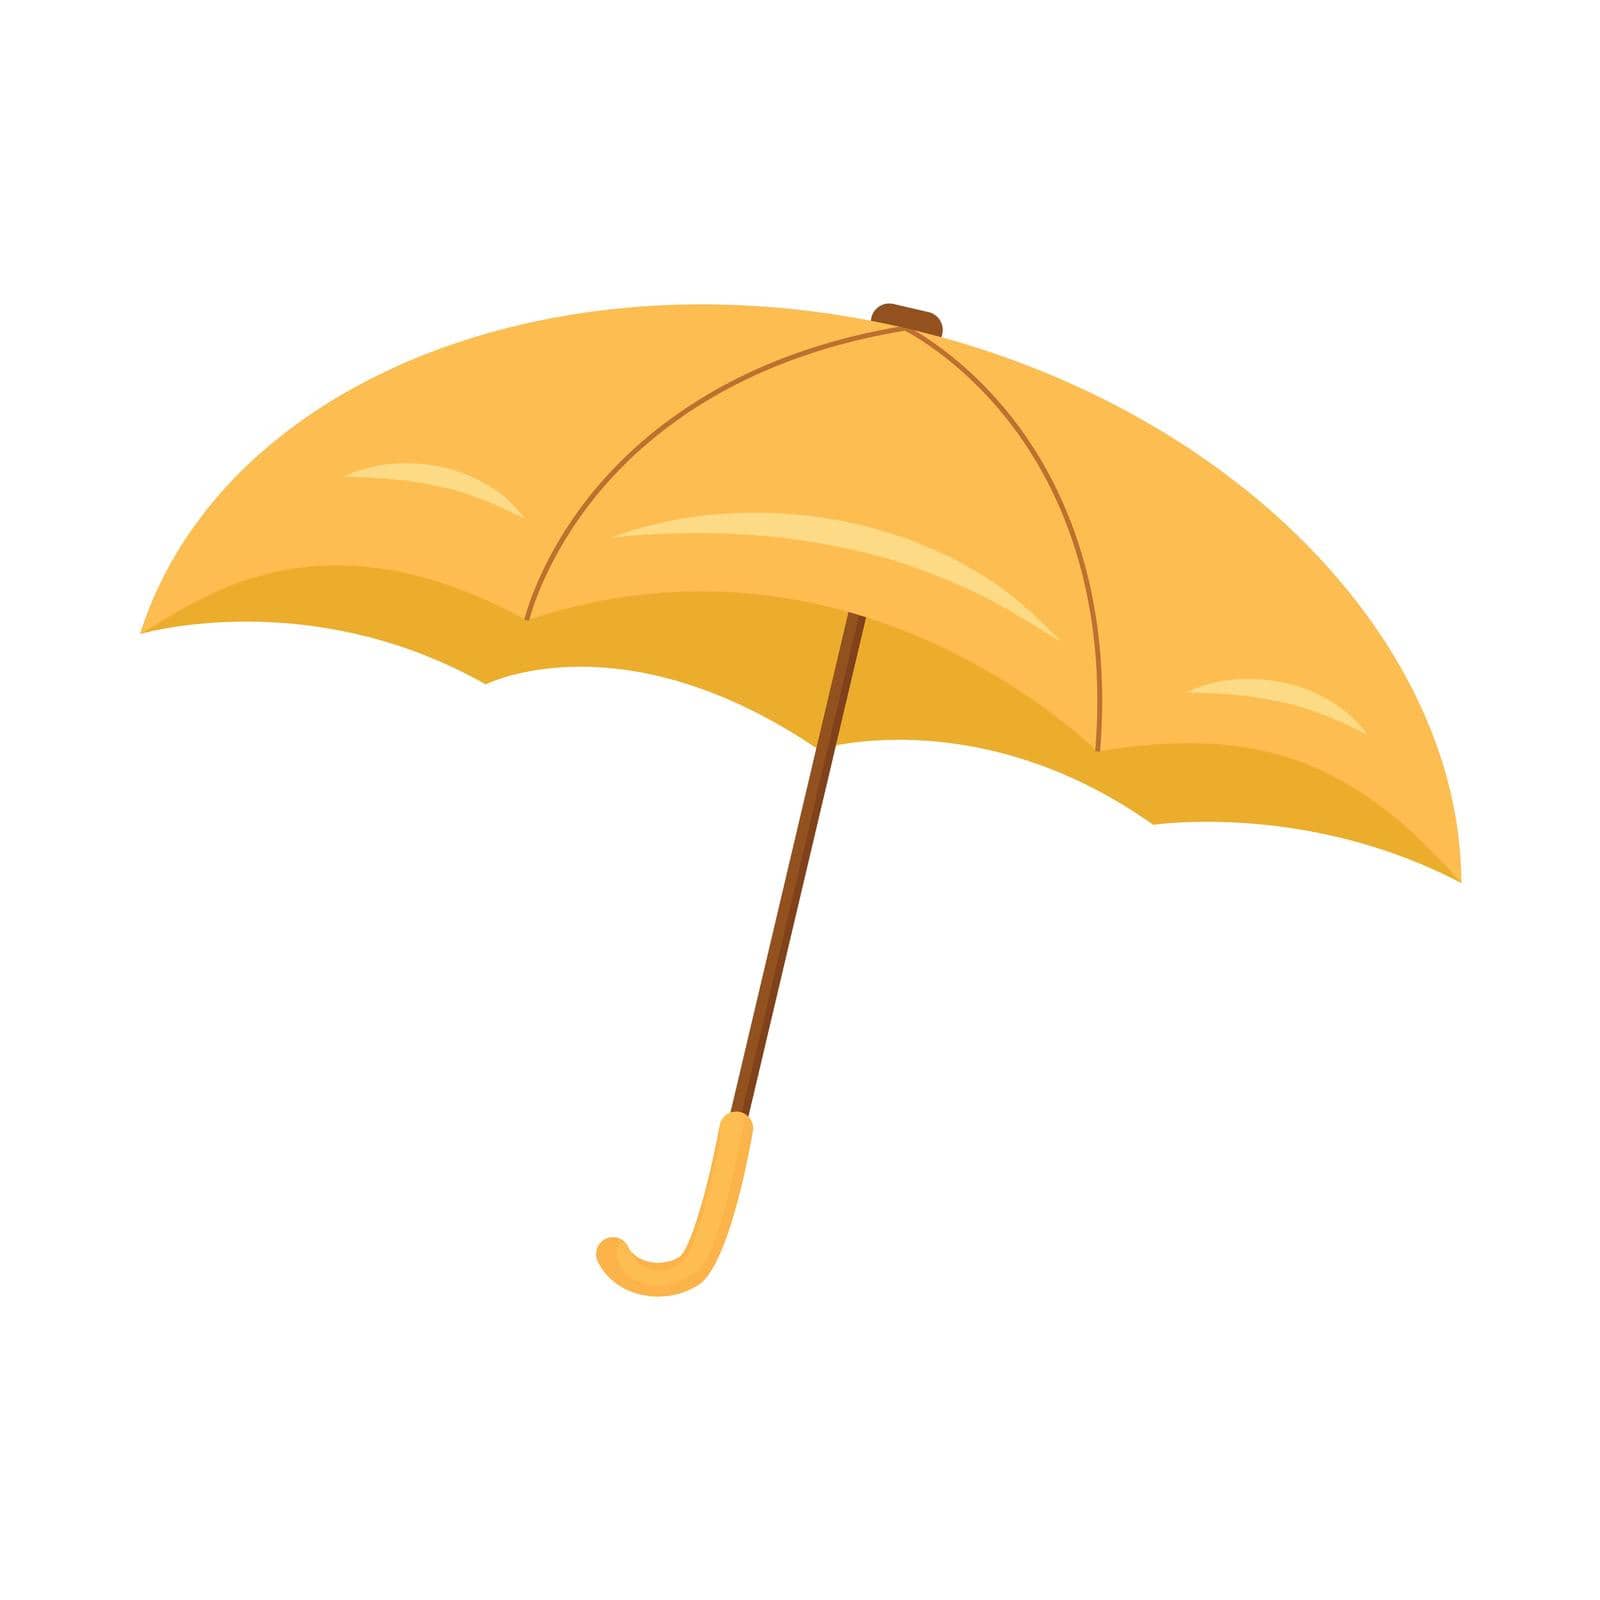 Umbrella semi flat color vector element. Full sized object on white. Rain and storm protection. Waterproof accessory simple cartoon style illustration for web graphic design and animation